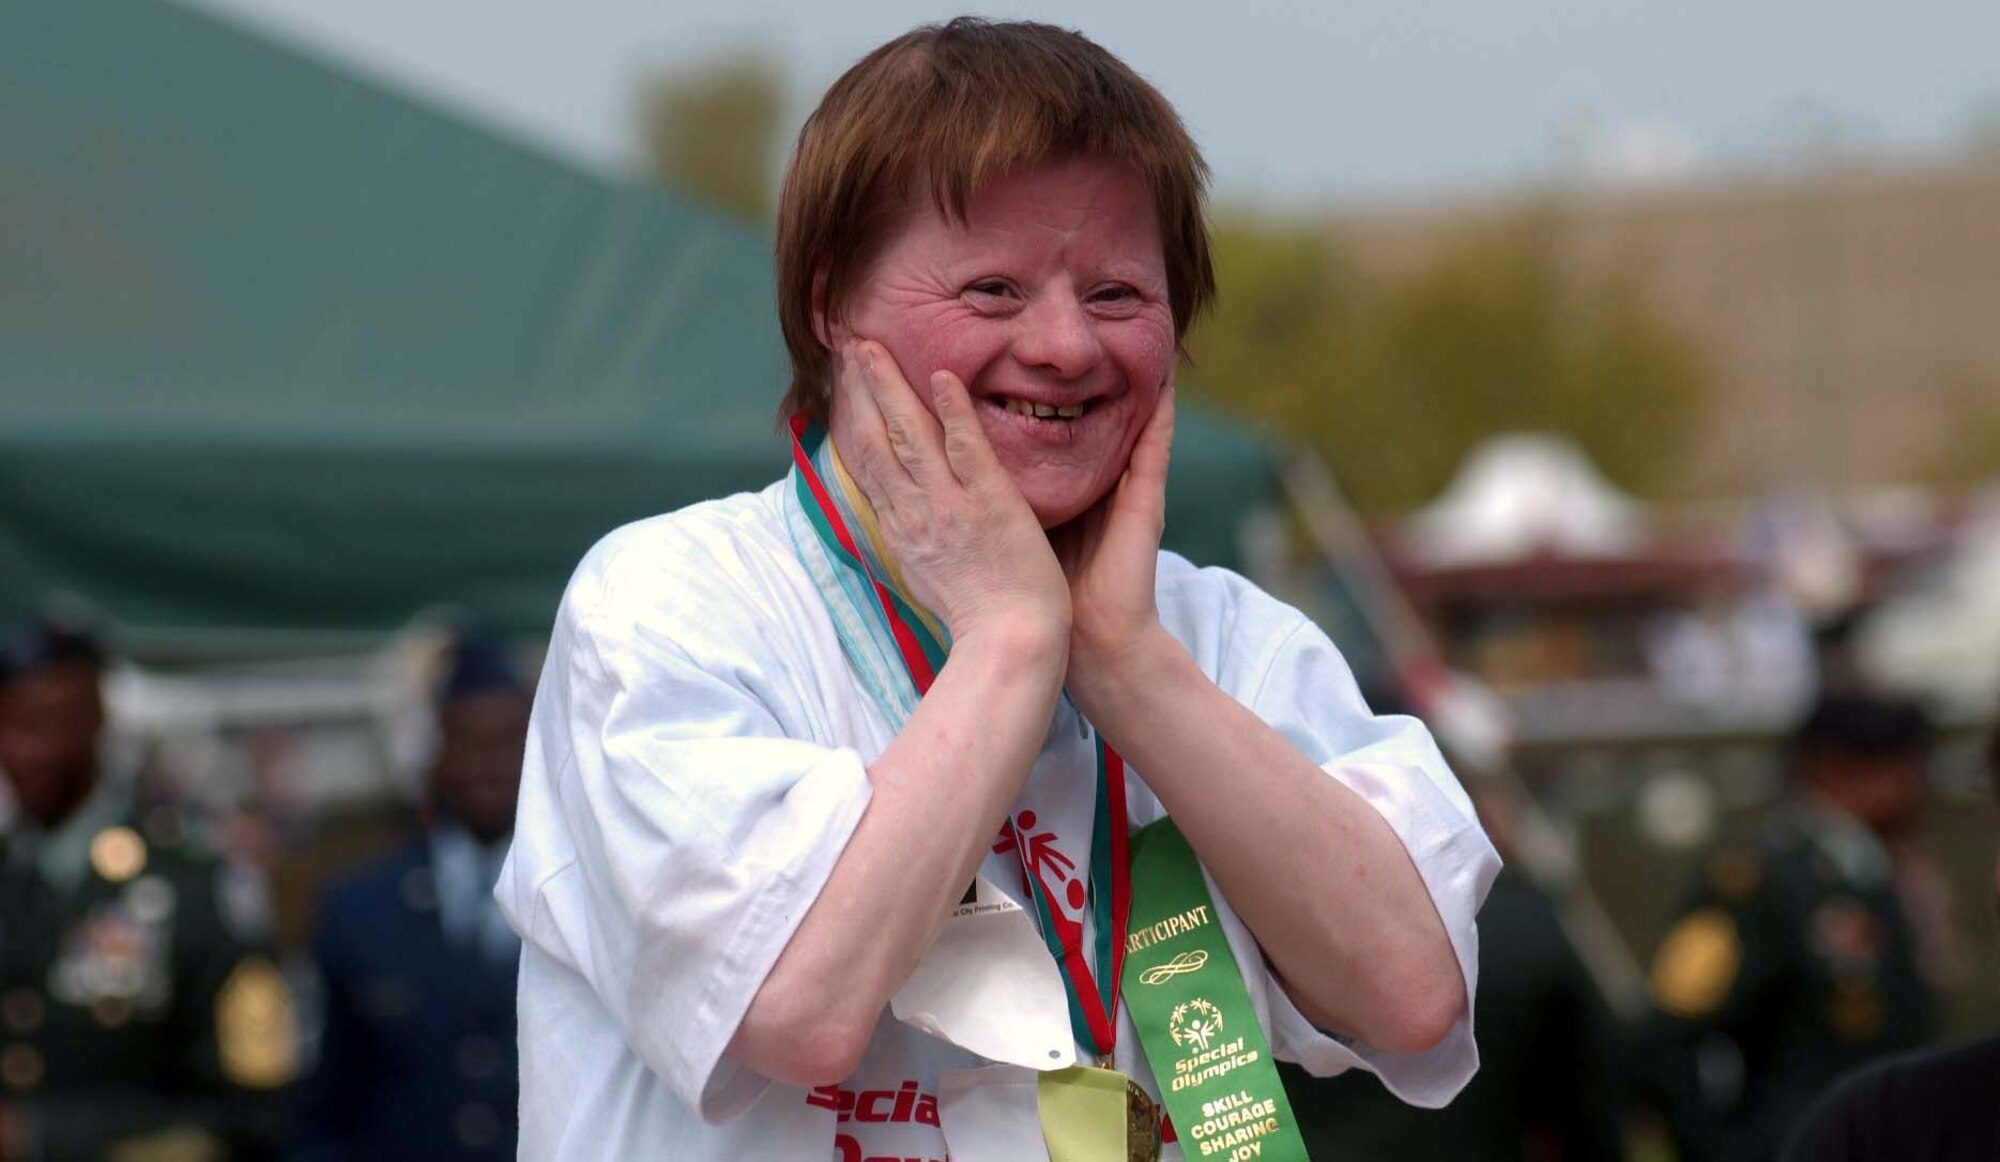 Marlene Belitz, from Tagesförderstätte Logo in Pirmasens, reacts to the crowd's applause after receiving a gold medal at the 2006 U.S. Army Garrison Kaiserslautern Special Olympics Spring Games at the Police Academy in Enkenbach-Alsenborn. This year's games will be held May 6 at the academy. Photo by Christine June 